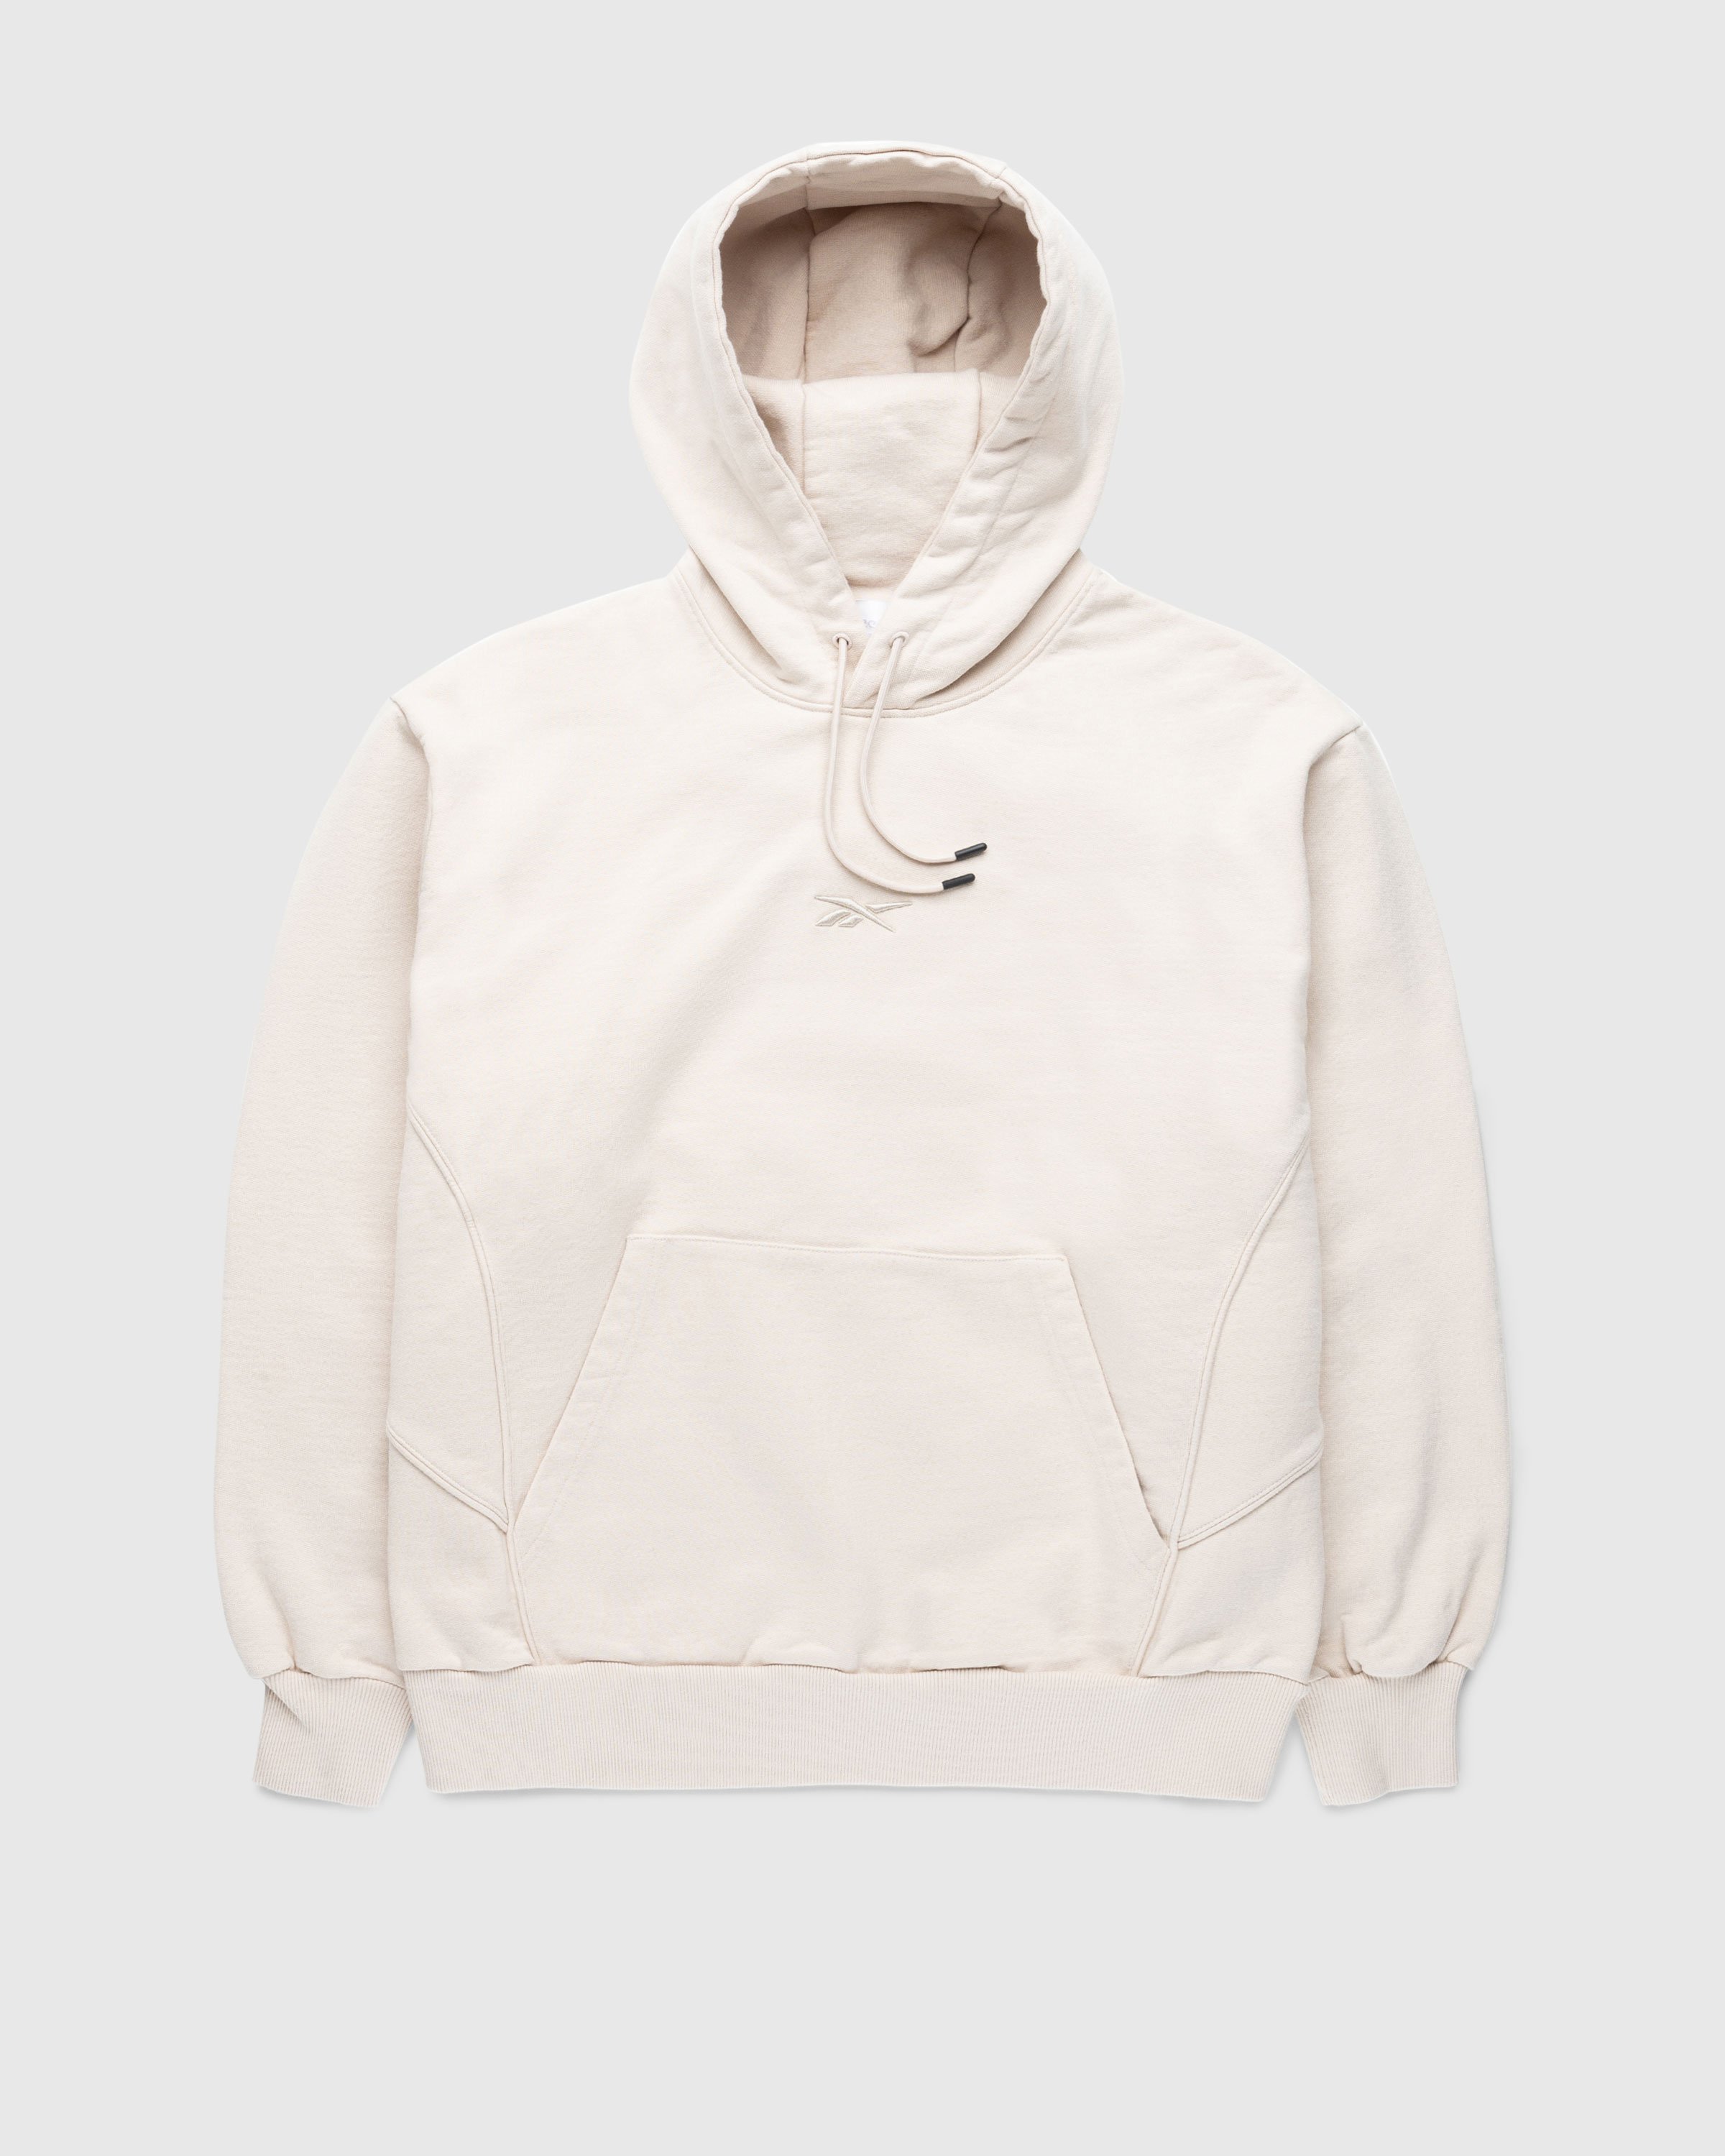 Reebok - Oversized Piped Hoodie Sand - Clothing - Beige - Image 1